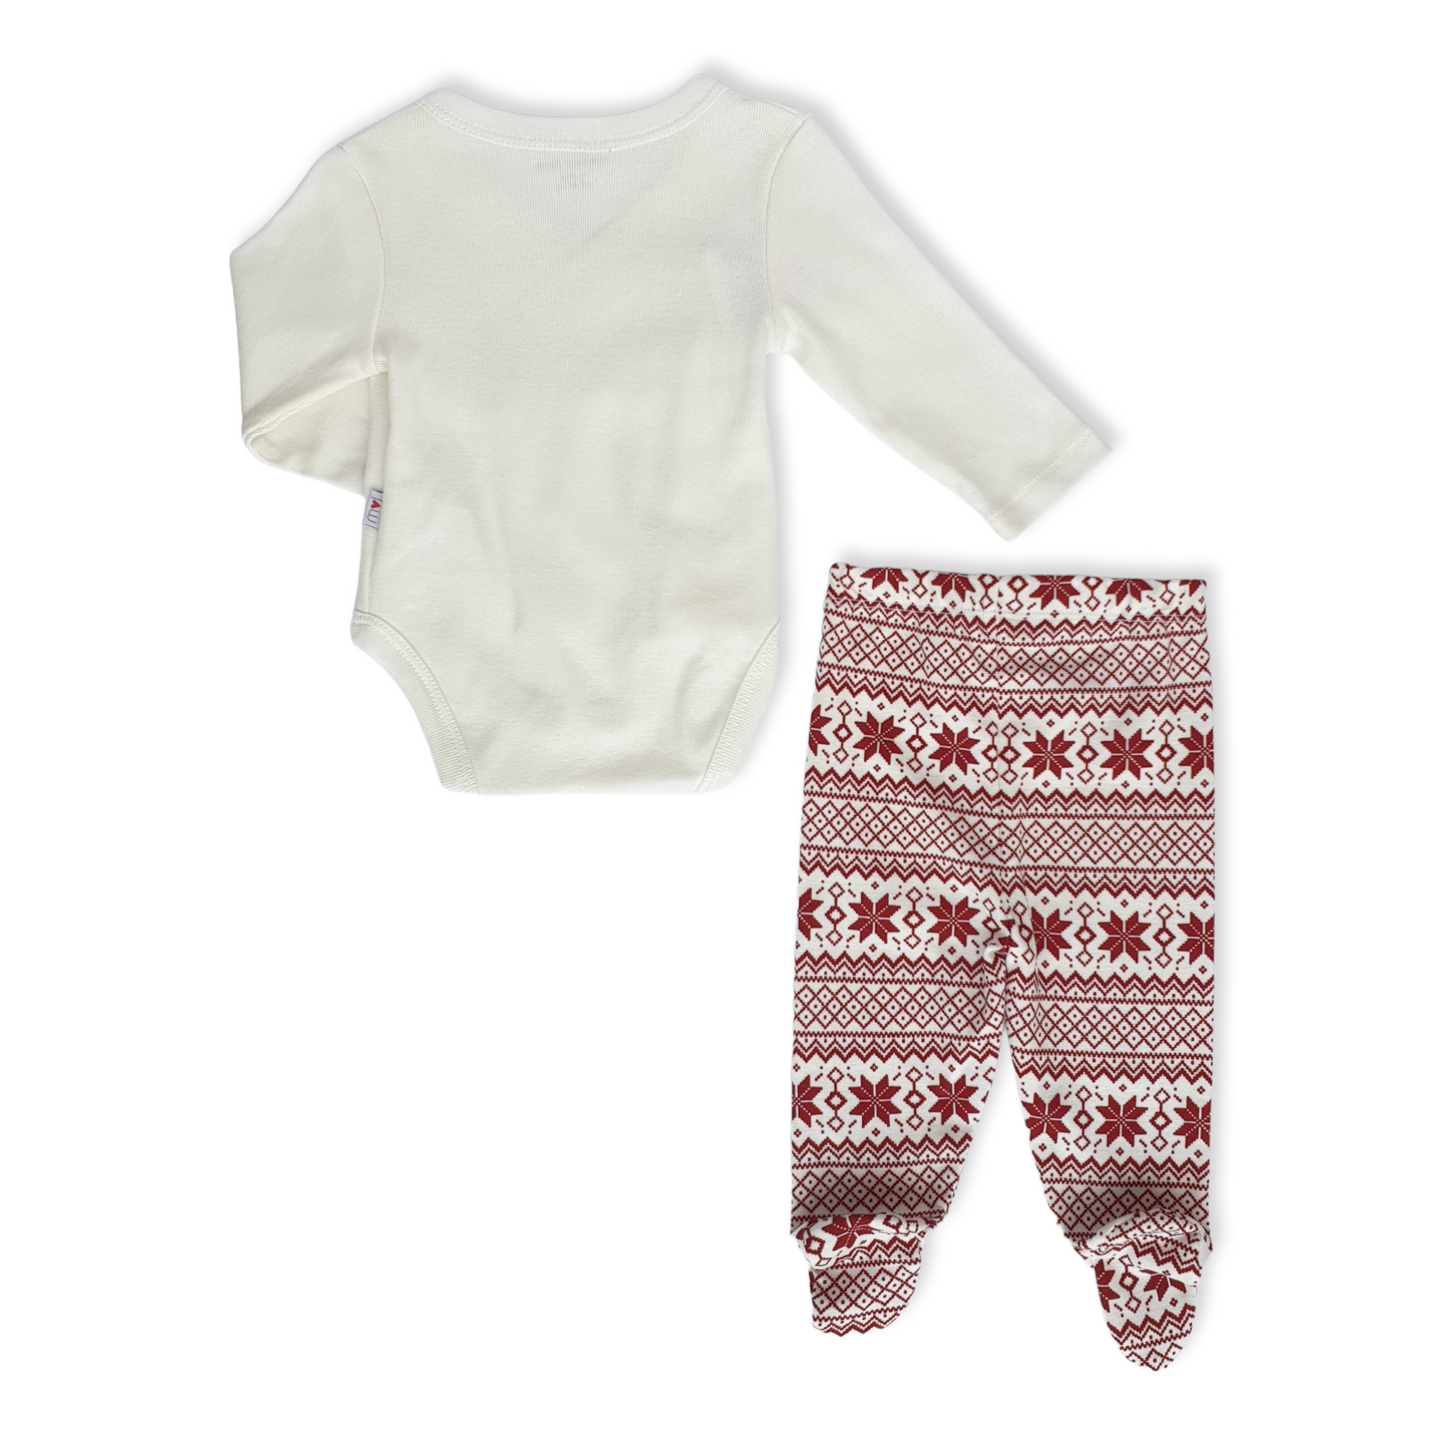 2pcs Unisex Winter Bear Body with Footed Pants-Bear, Body, Bodysuit, Boy, Cartoon, catboy, catgirl, catset2pcs, catunisex, Creeper, Footless, Long Sleeve, Newborn, Onesie, Pants, Red, Unisex, White-Mother Love-[Too Twee]-[Tootwee]-[baby]-[newborn]-[clothes]-[essentials]-[toys]-[Lebanon]